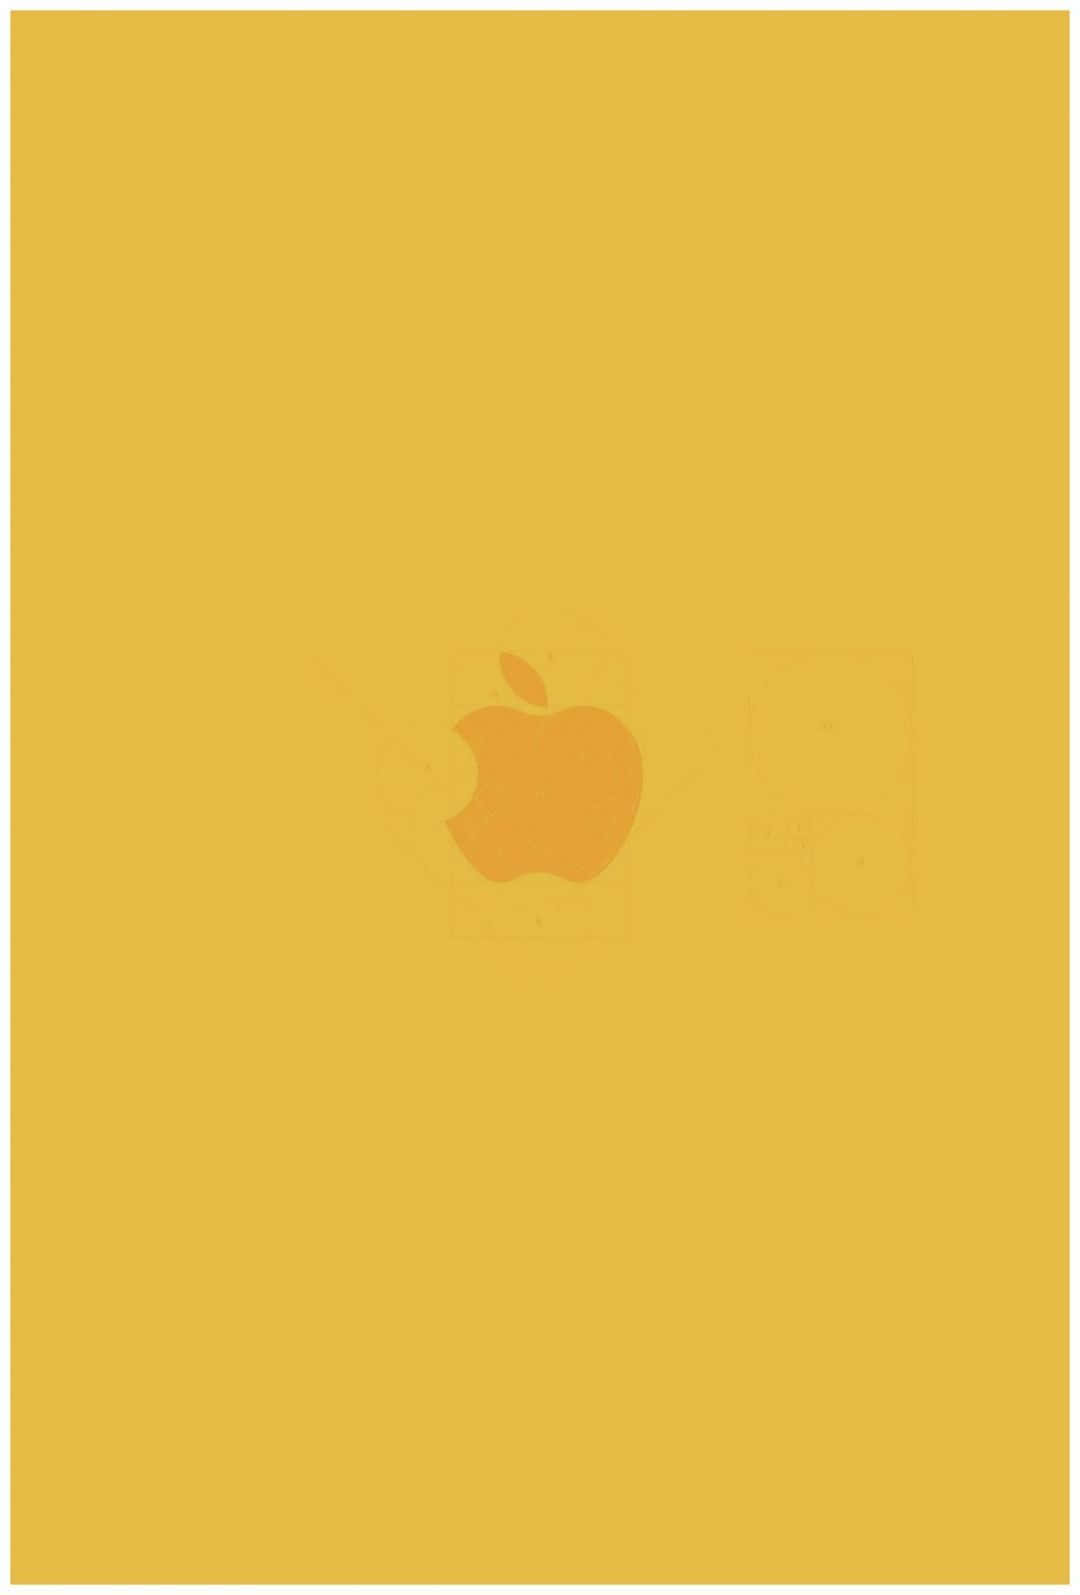 Enjoy the sun-filled vibes of Yellow Aesthetic with the Iphone. Wallpaper